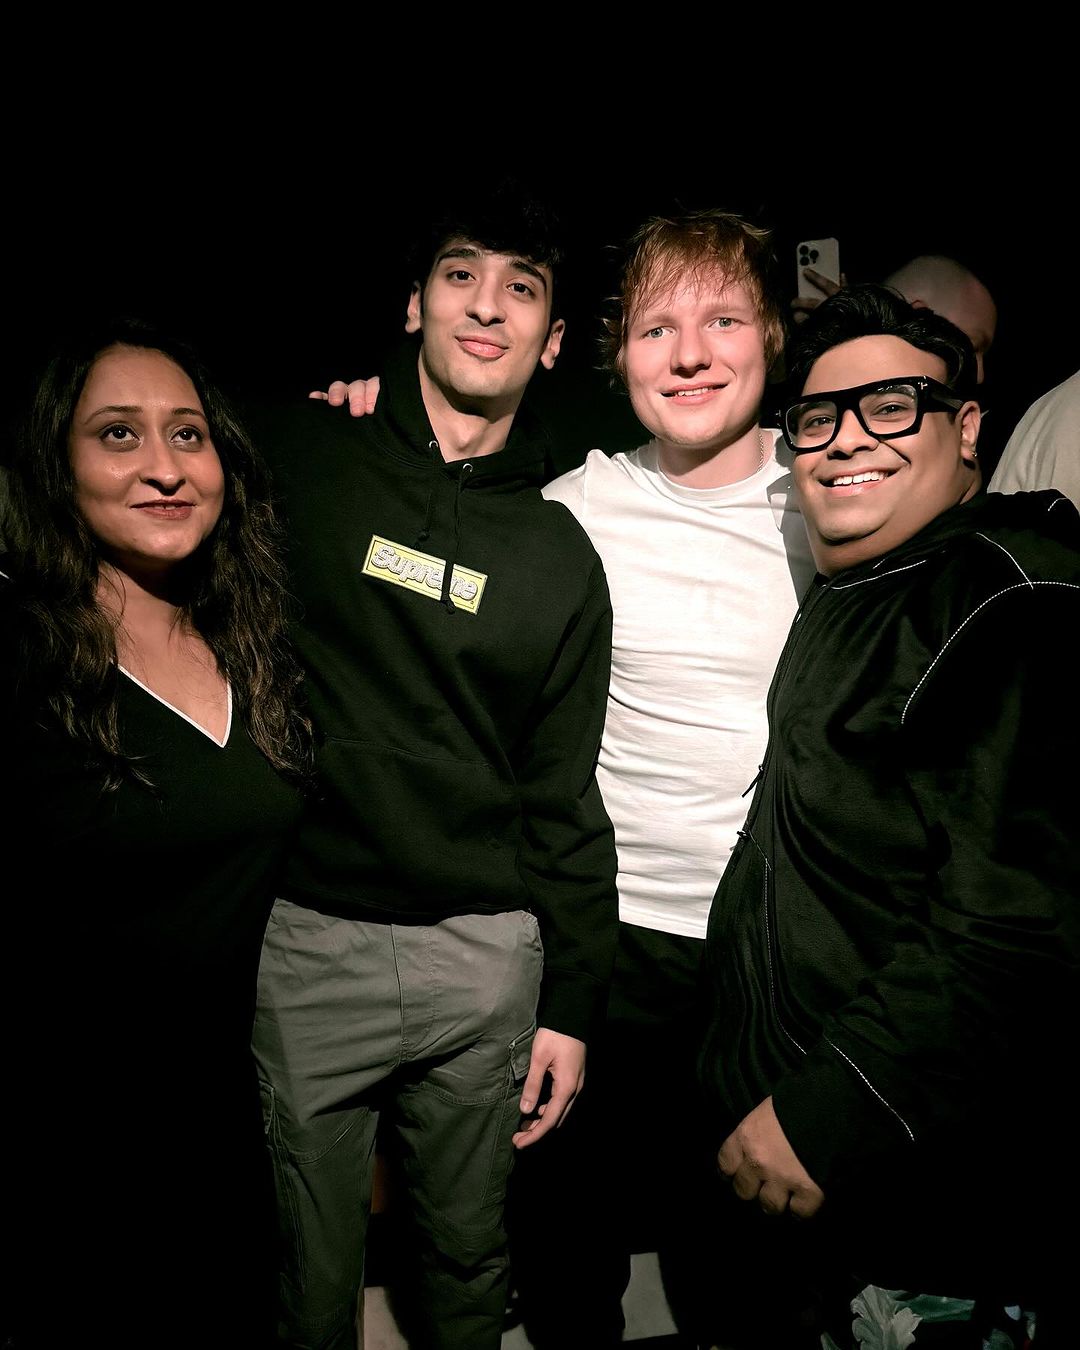 Kiku Sharda And His Family Meet Ed Sheeran! He Says A Day Well Spent, Thanks For Being So Gracious!